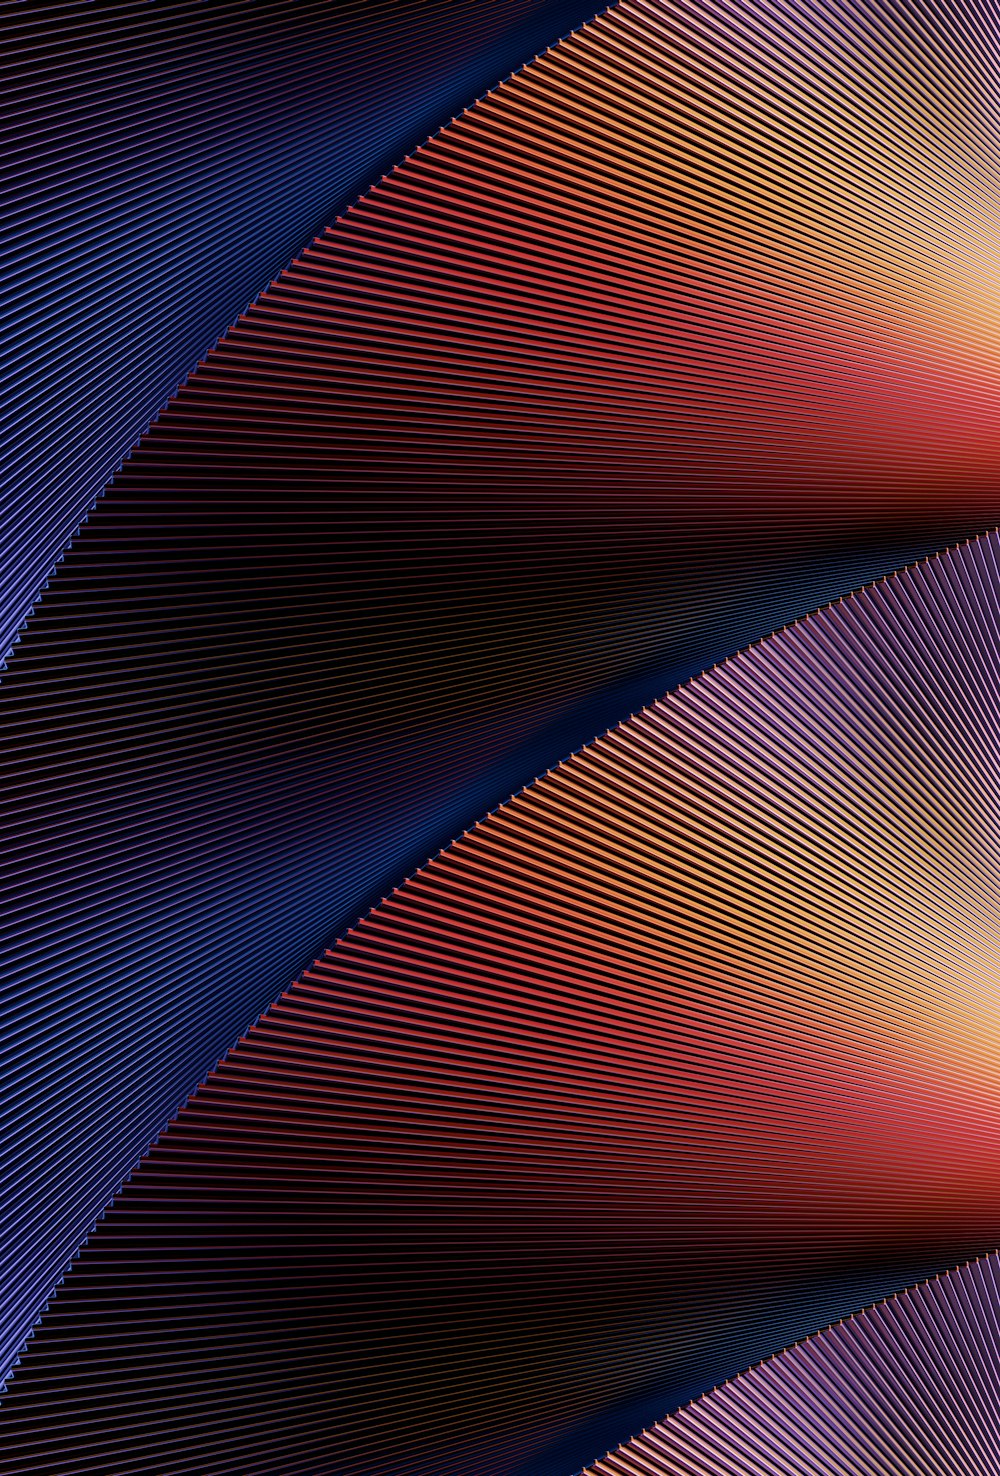 a colorful background with lines and curves